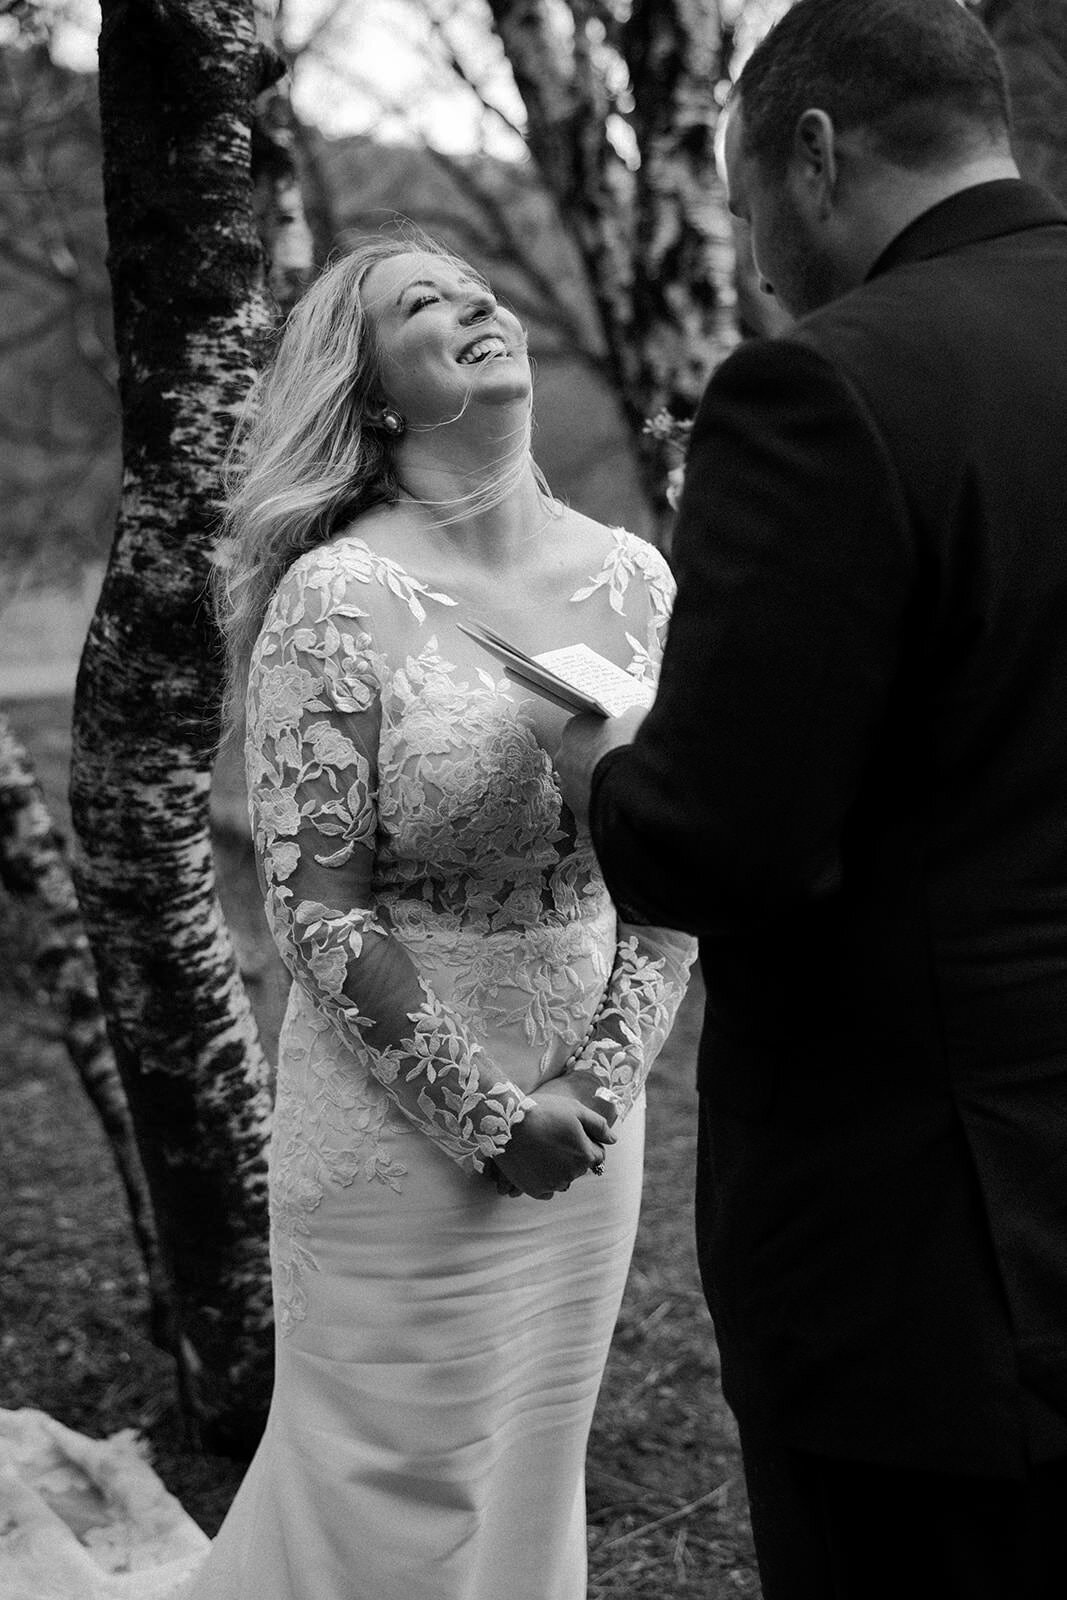 A heartfelt black and white photo of a bride laughing during a vow reading in a forested setting